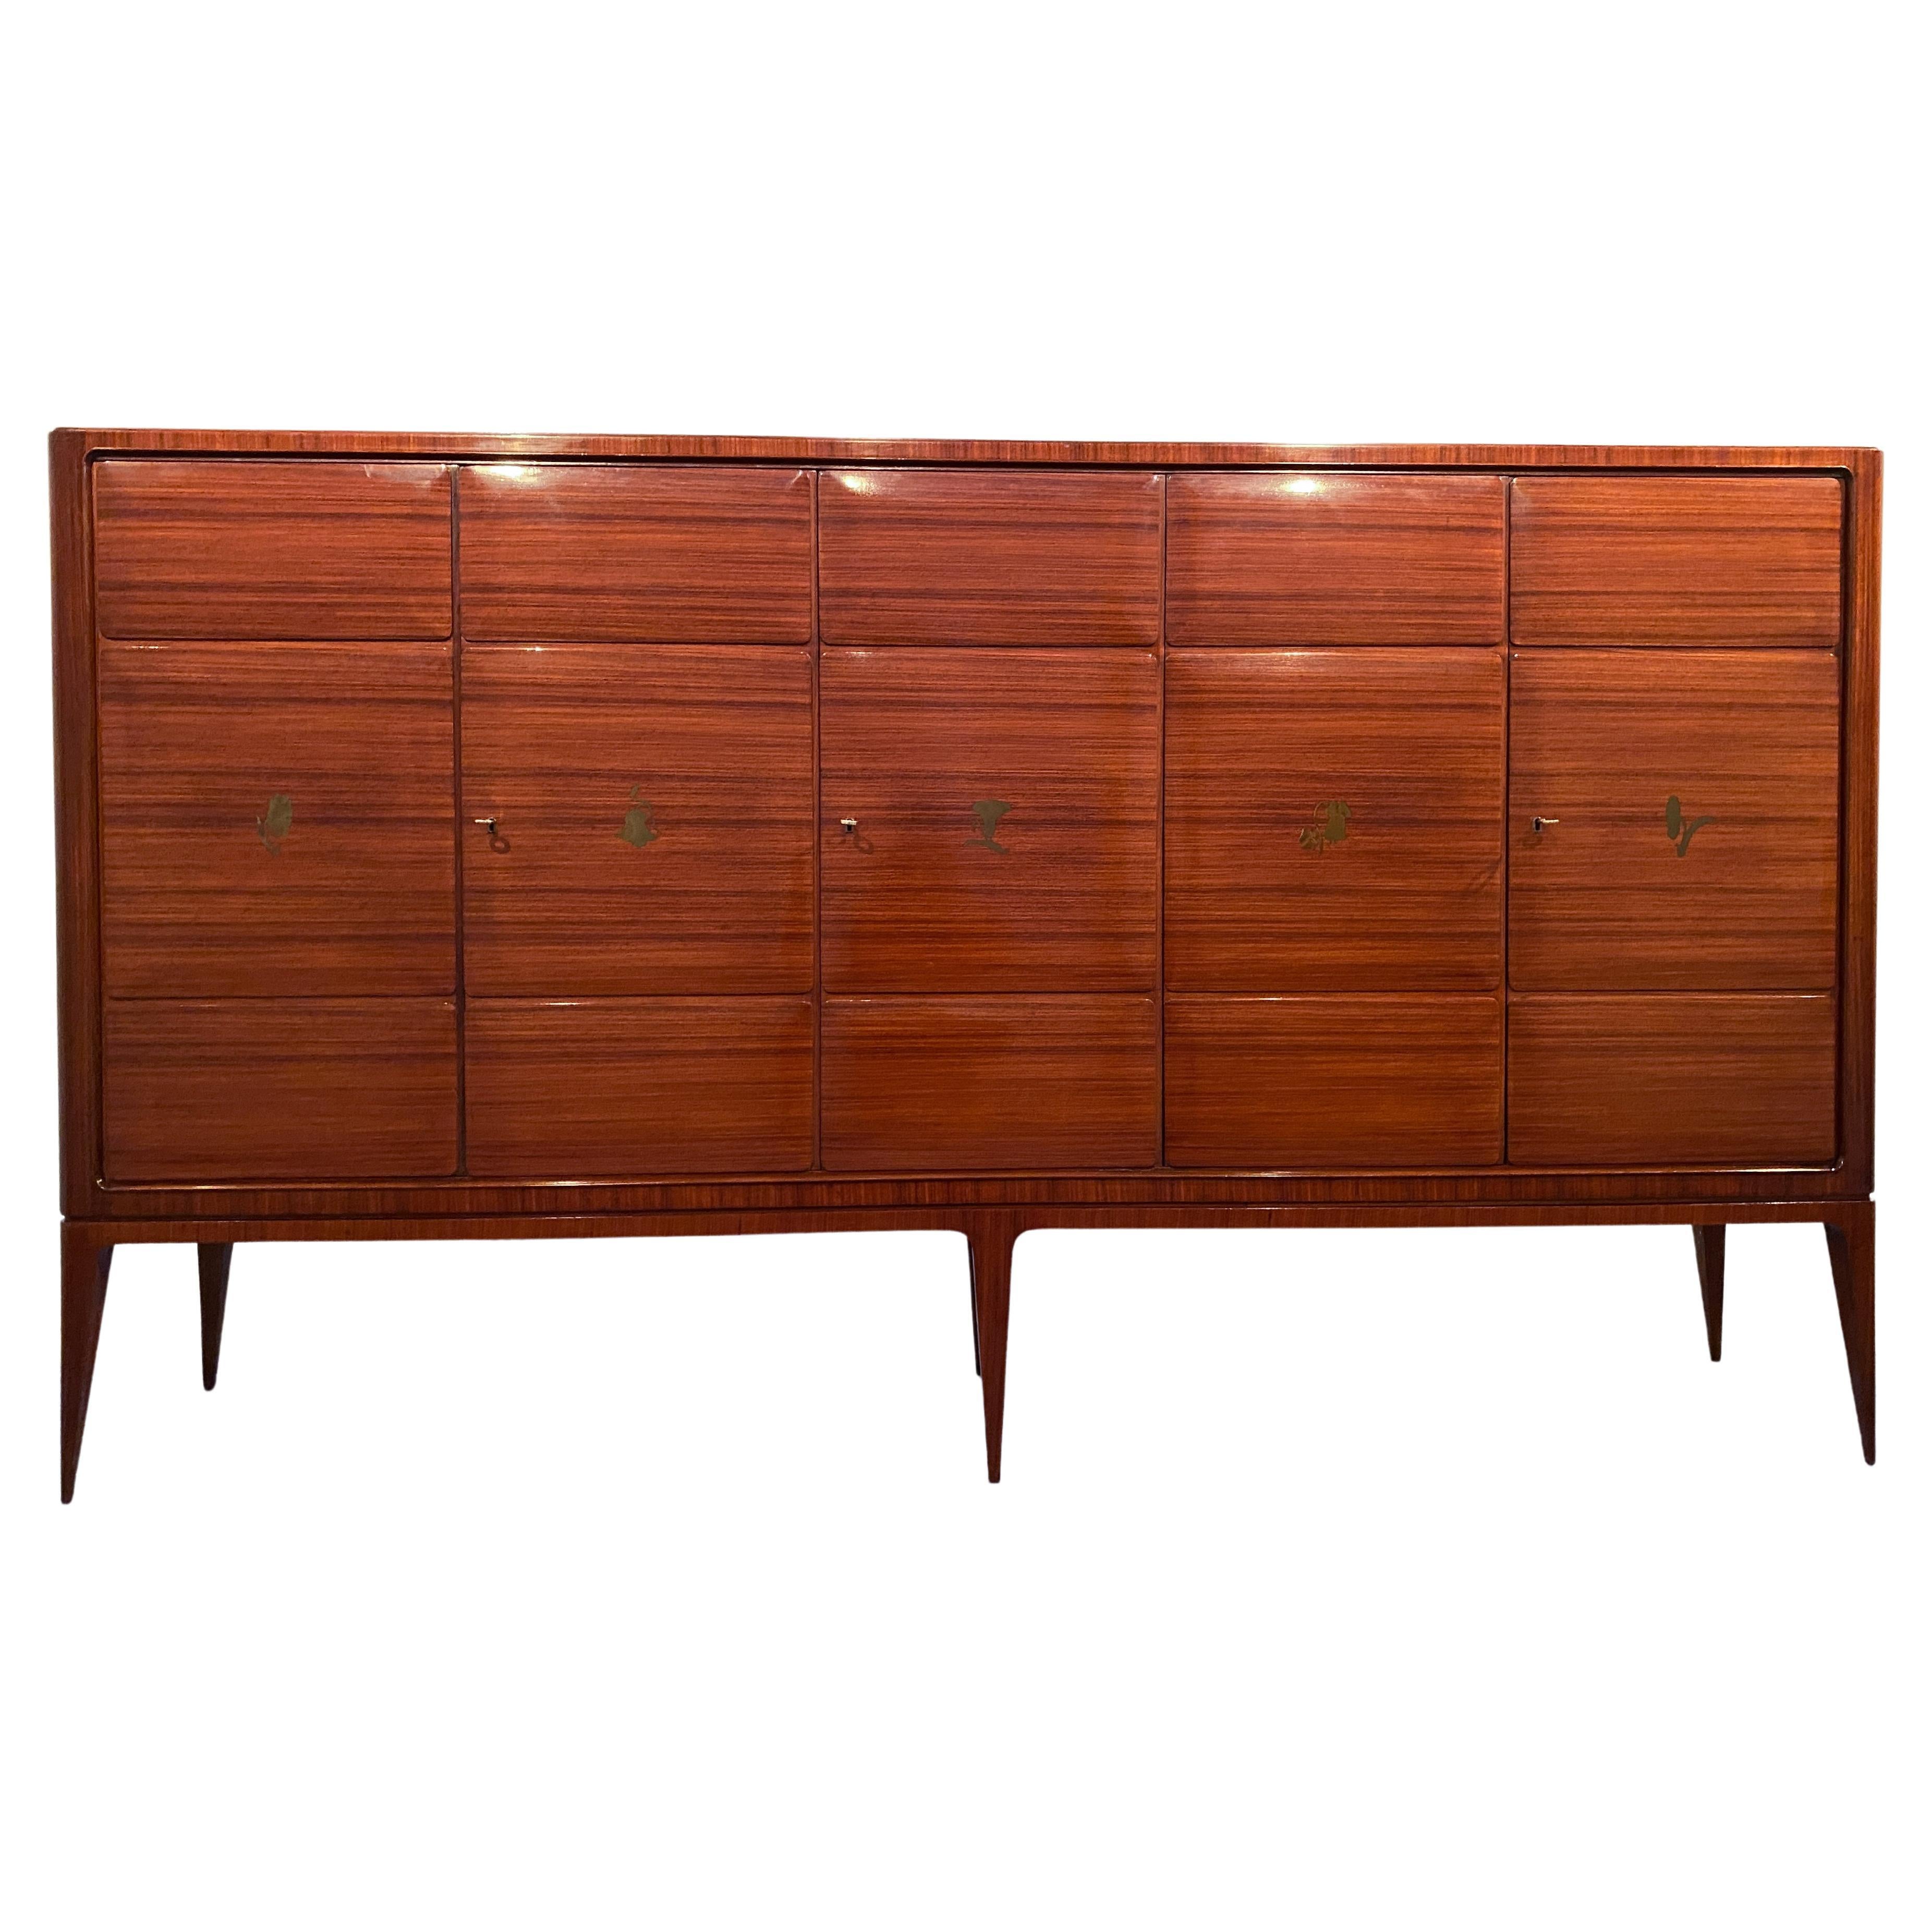 Italian Mid-Century Modern Tall Sideboard Cabinet Designed by Paolo Buffa, 1950 For Sale